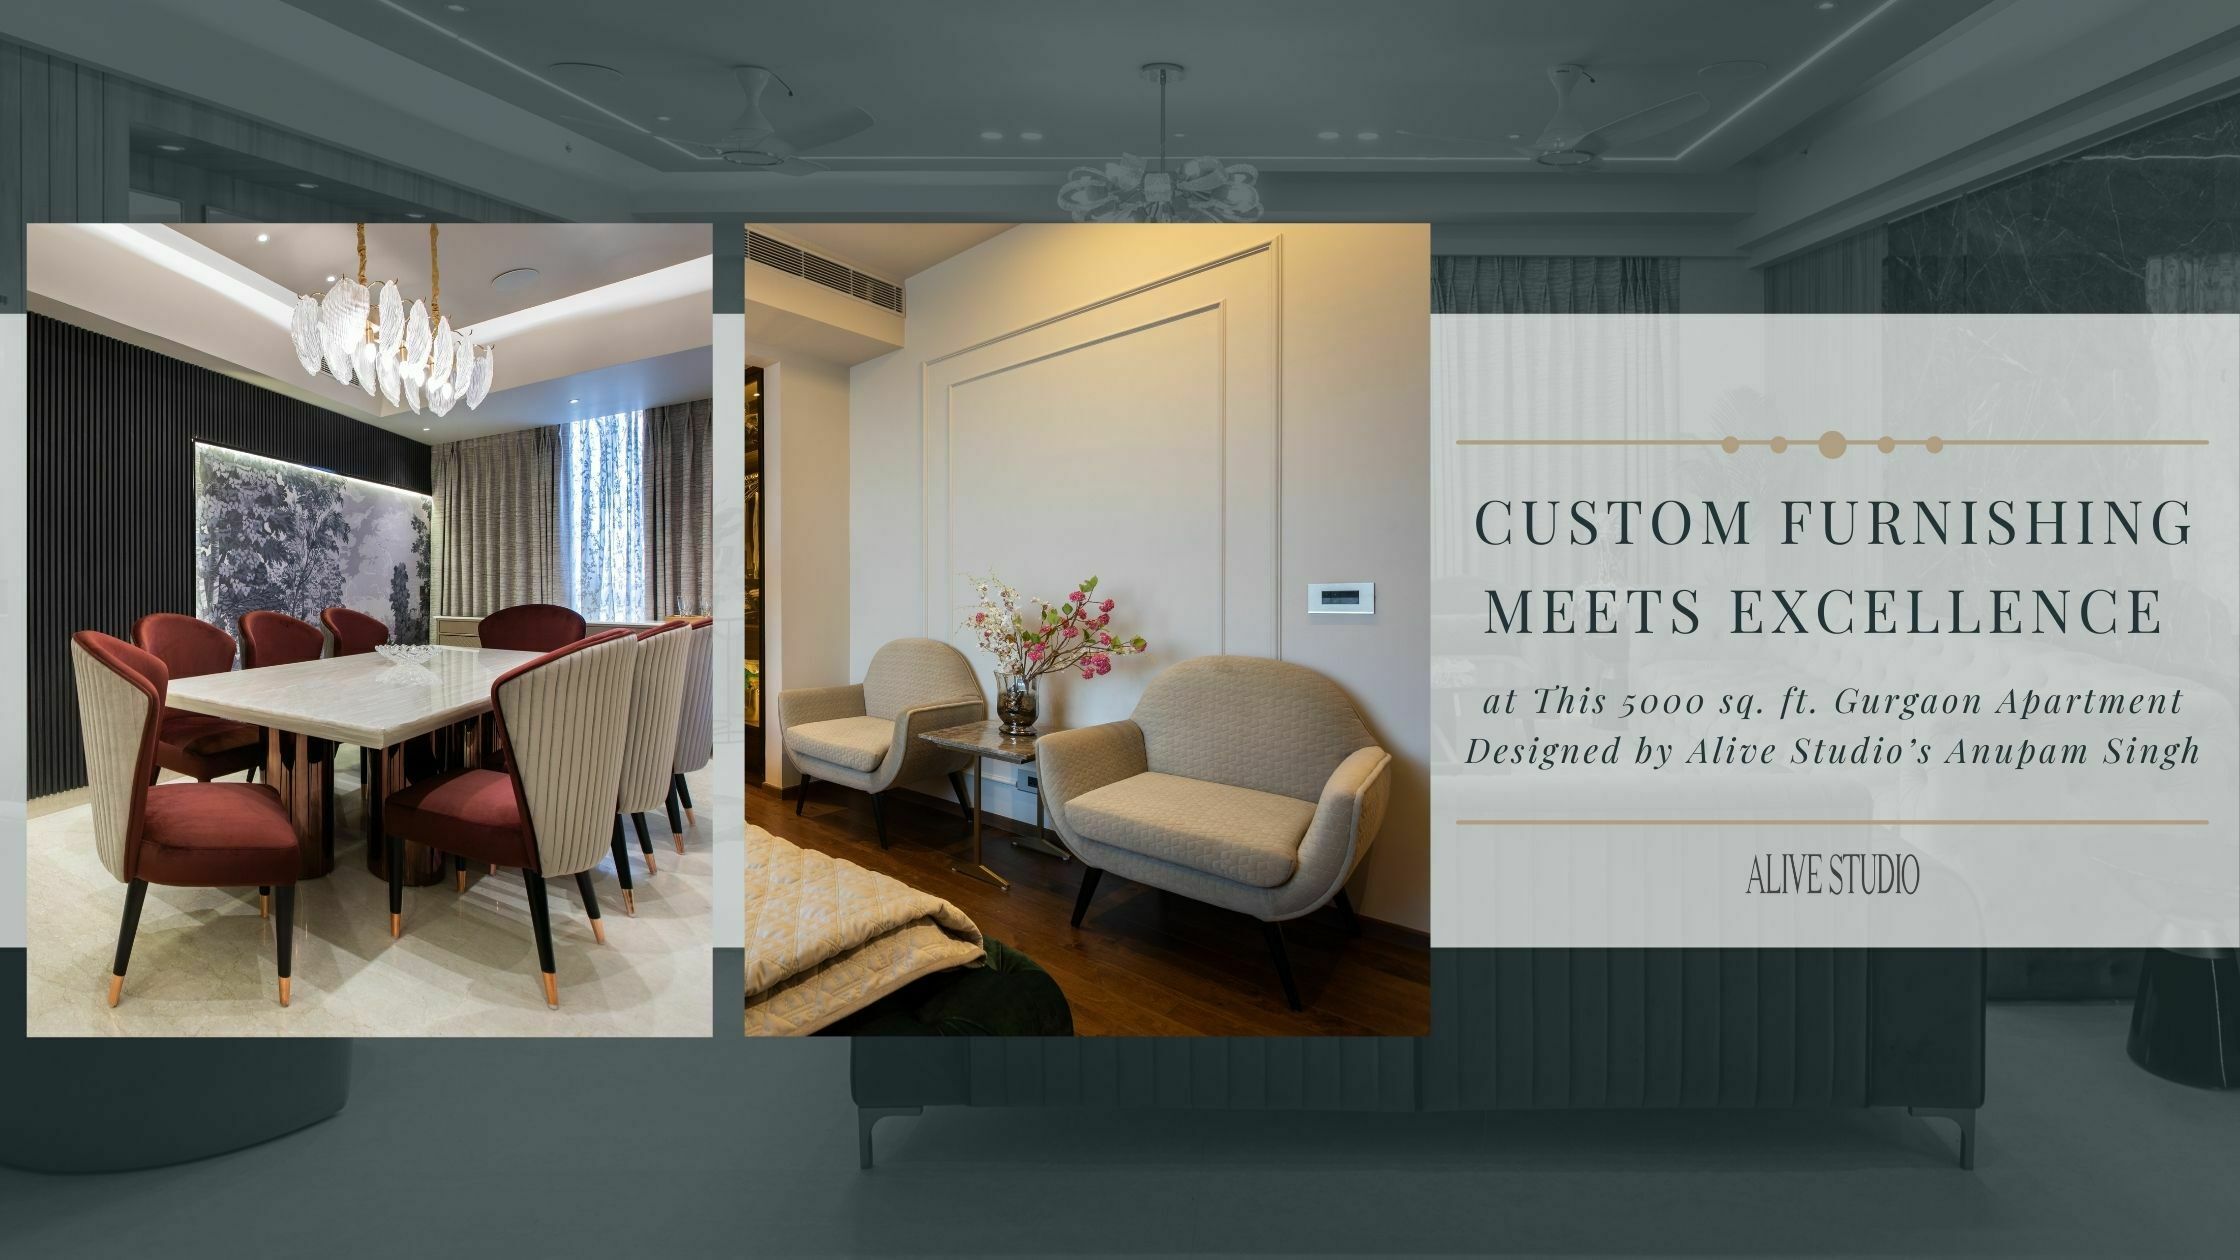 Custom Furnishing Meets Excellence